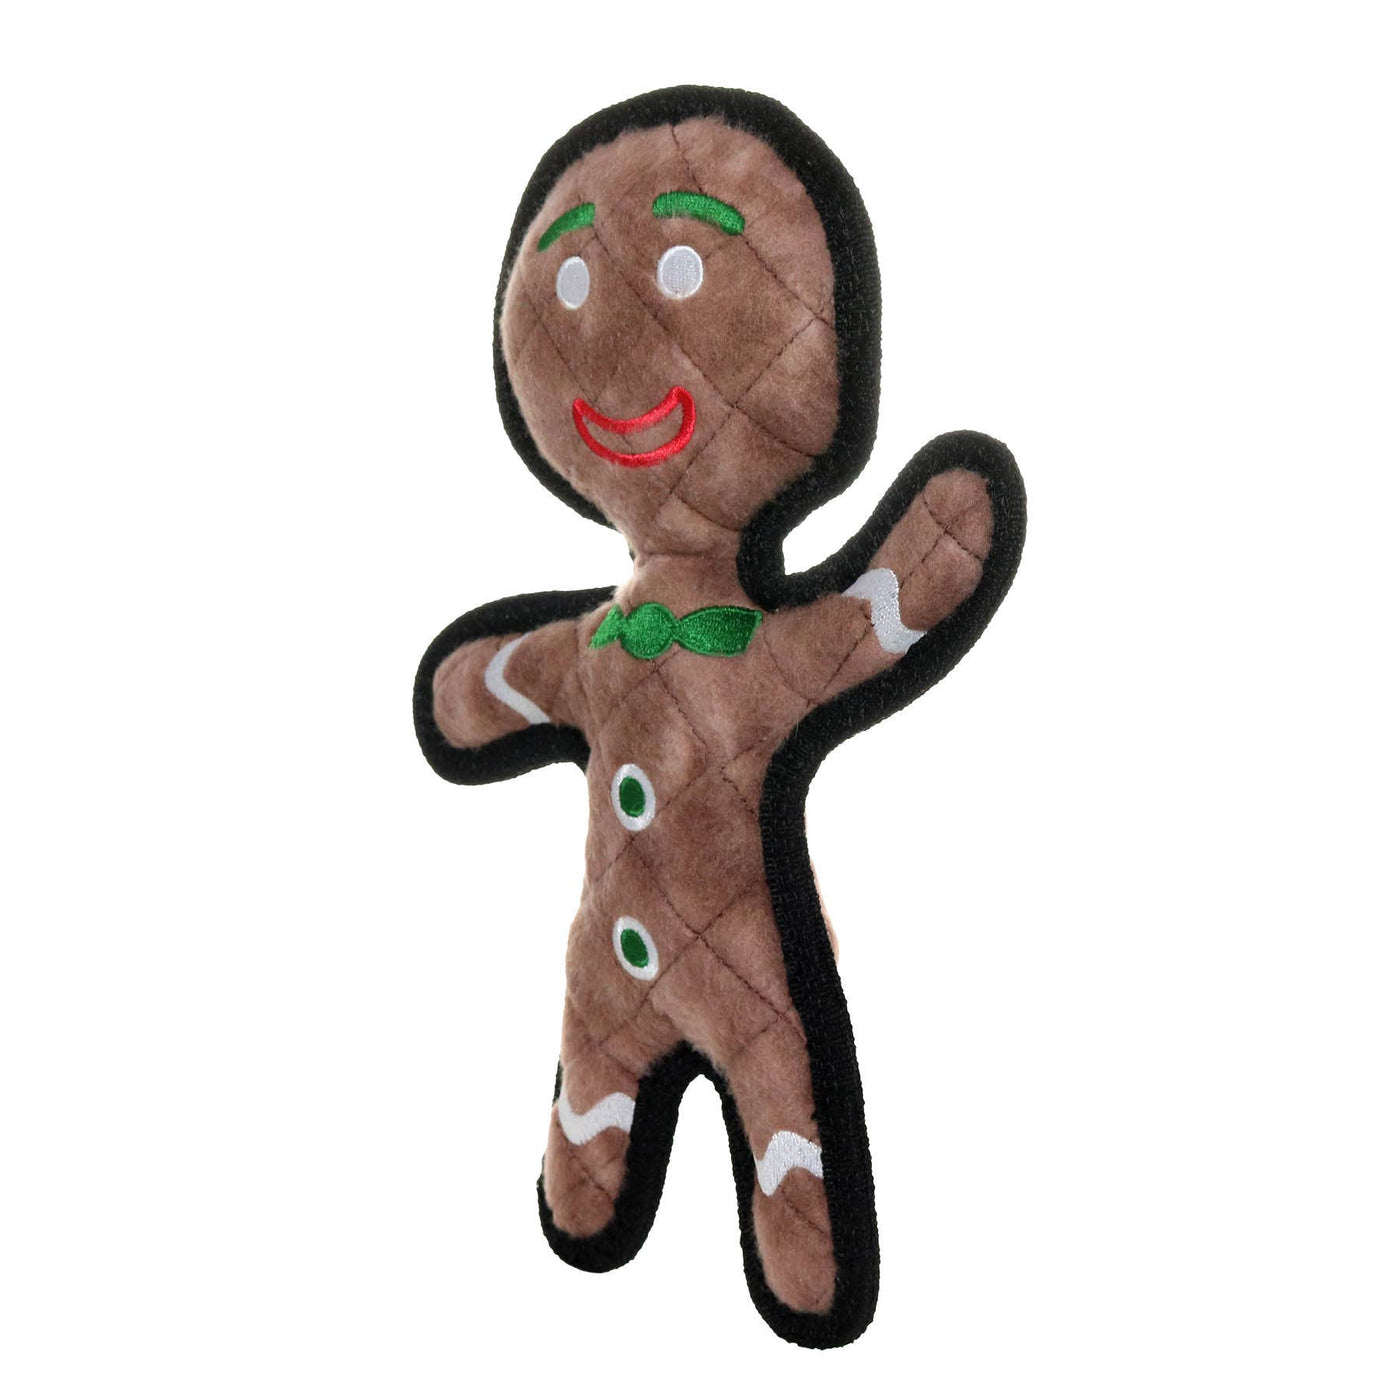 Tuffy Gingerbread Man - Christmas, Durable, Squeaky Dog Toy